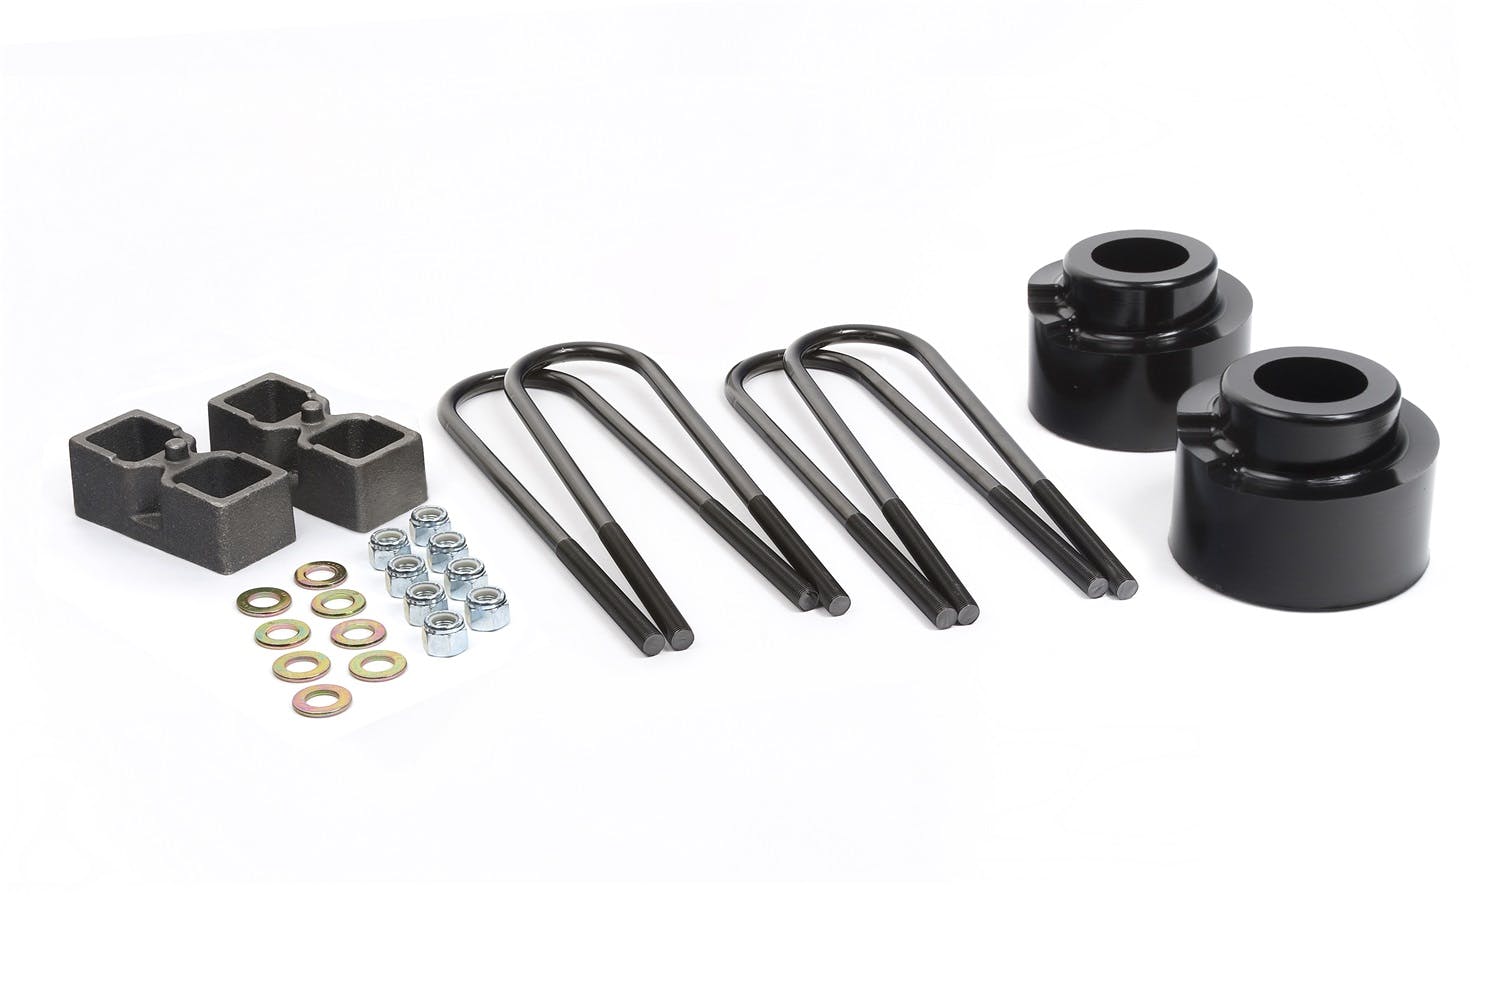 Daystar KF09127BK Suspension Lift Kit; 2.5 inch Front Coil Spring Spacers; 2 inch Rear Lift Blocks